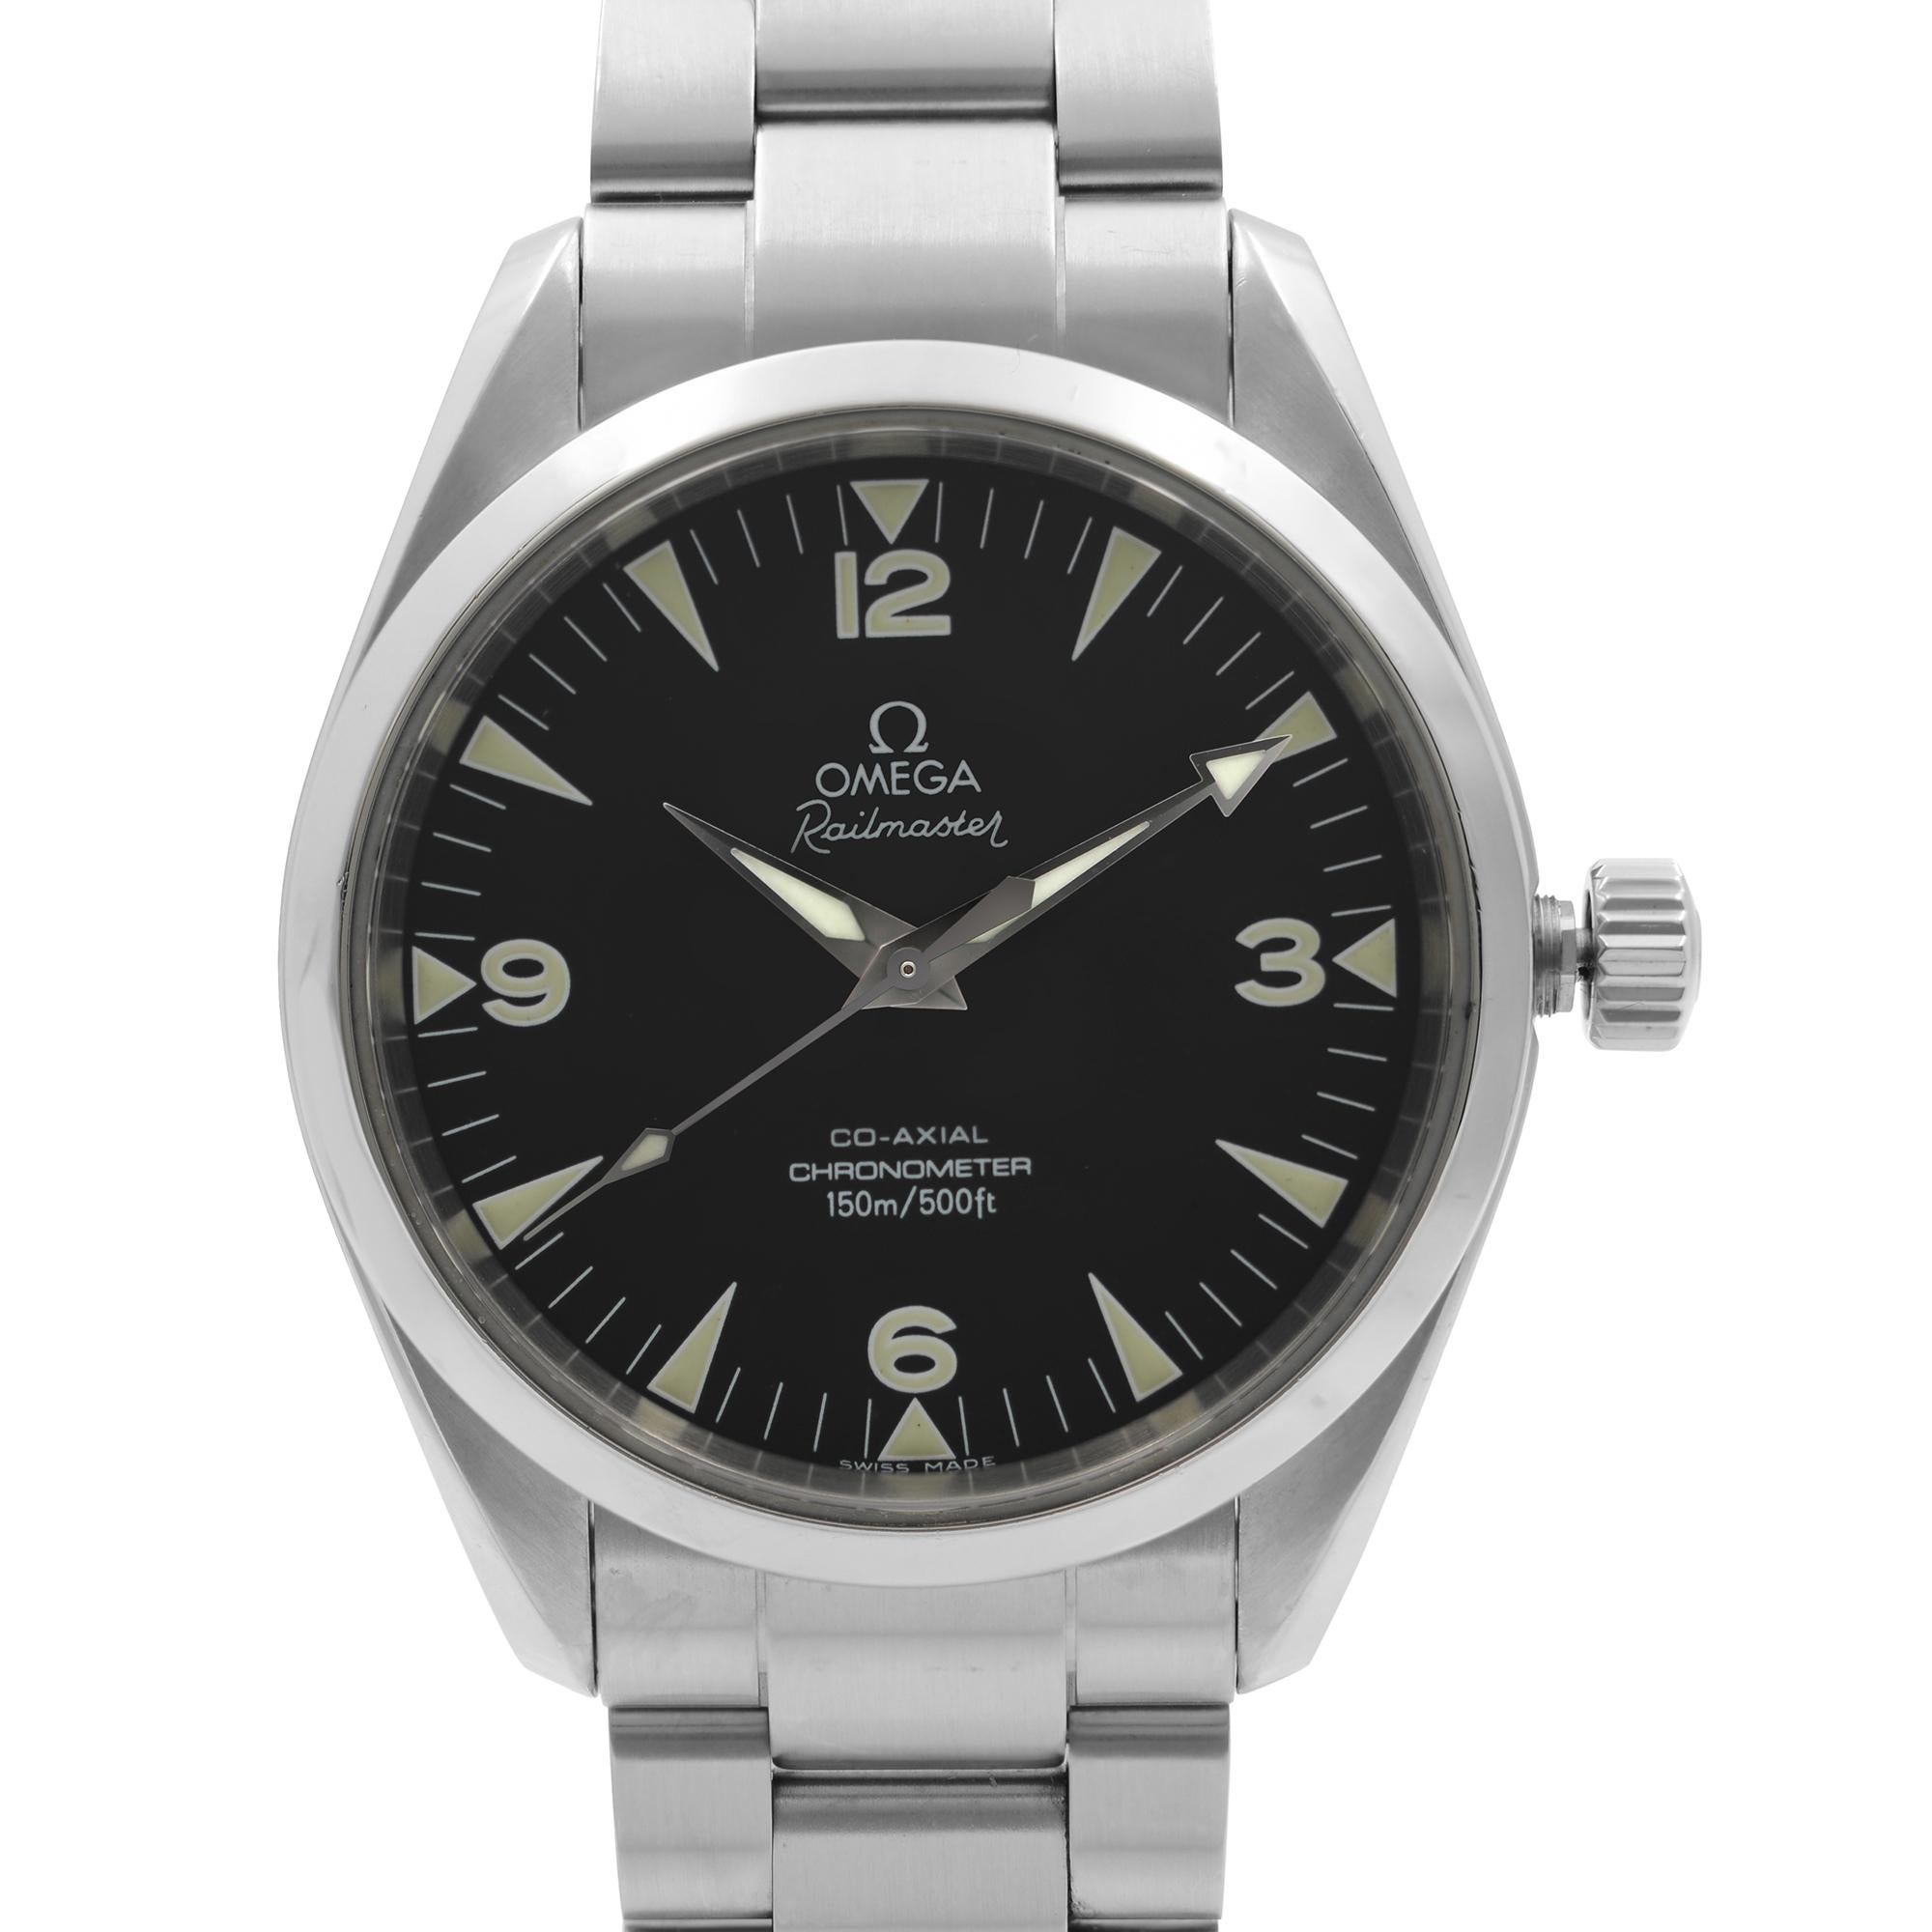 Pre Owned Omega Railmaster Chronometer 38mm Stainless Steel Black Dial Automatic Men's Watch 2803.52.37. This Beautiful Timepiece is Powered by Mechanical (Automatic) Movement And Features: Round Stainless Steel Case & Bracelet, Fixed Stainless